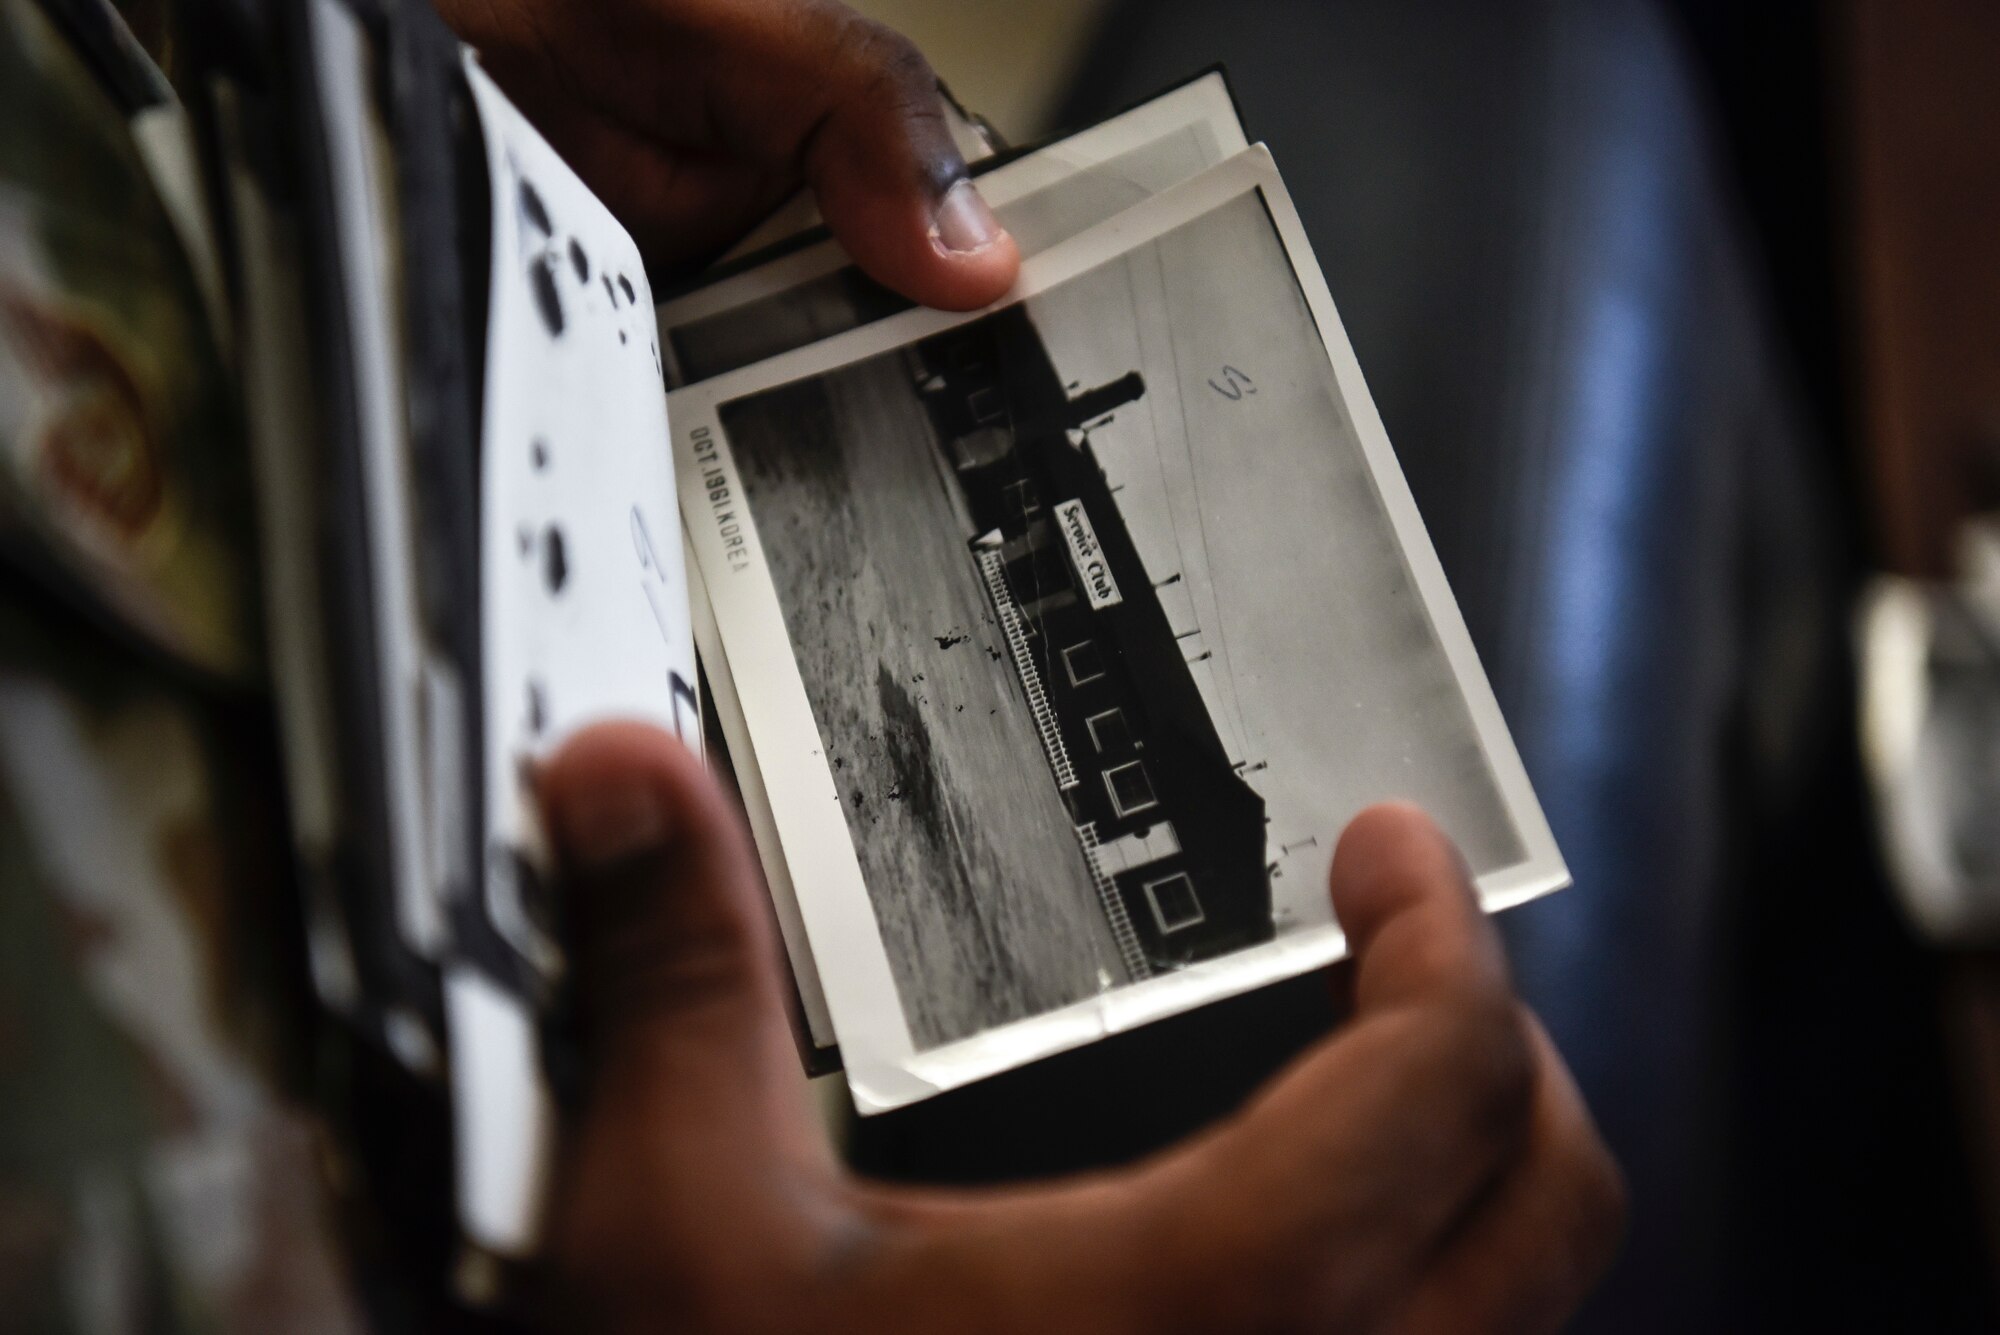 A photo of an Airman holding an old photo from the 1960s.